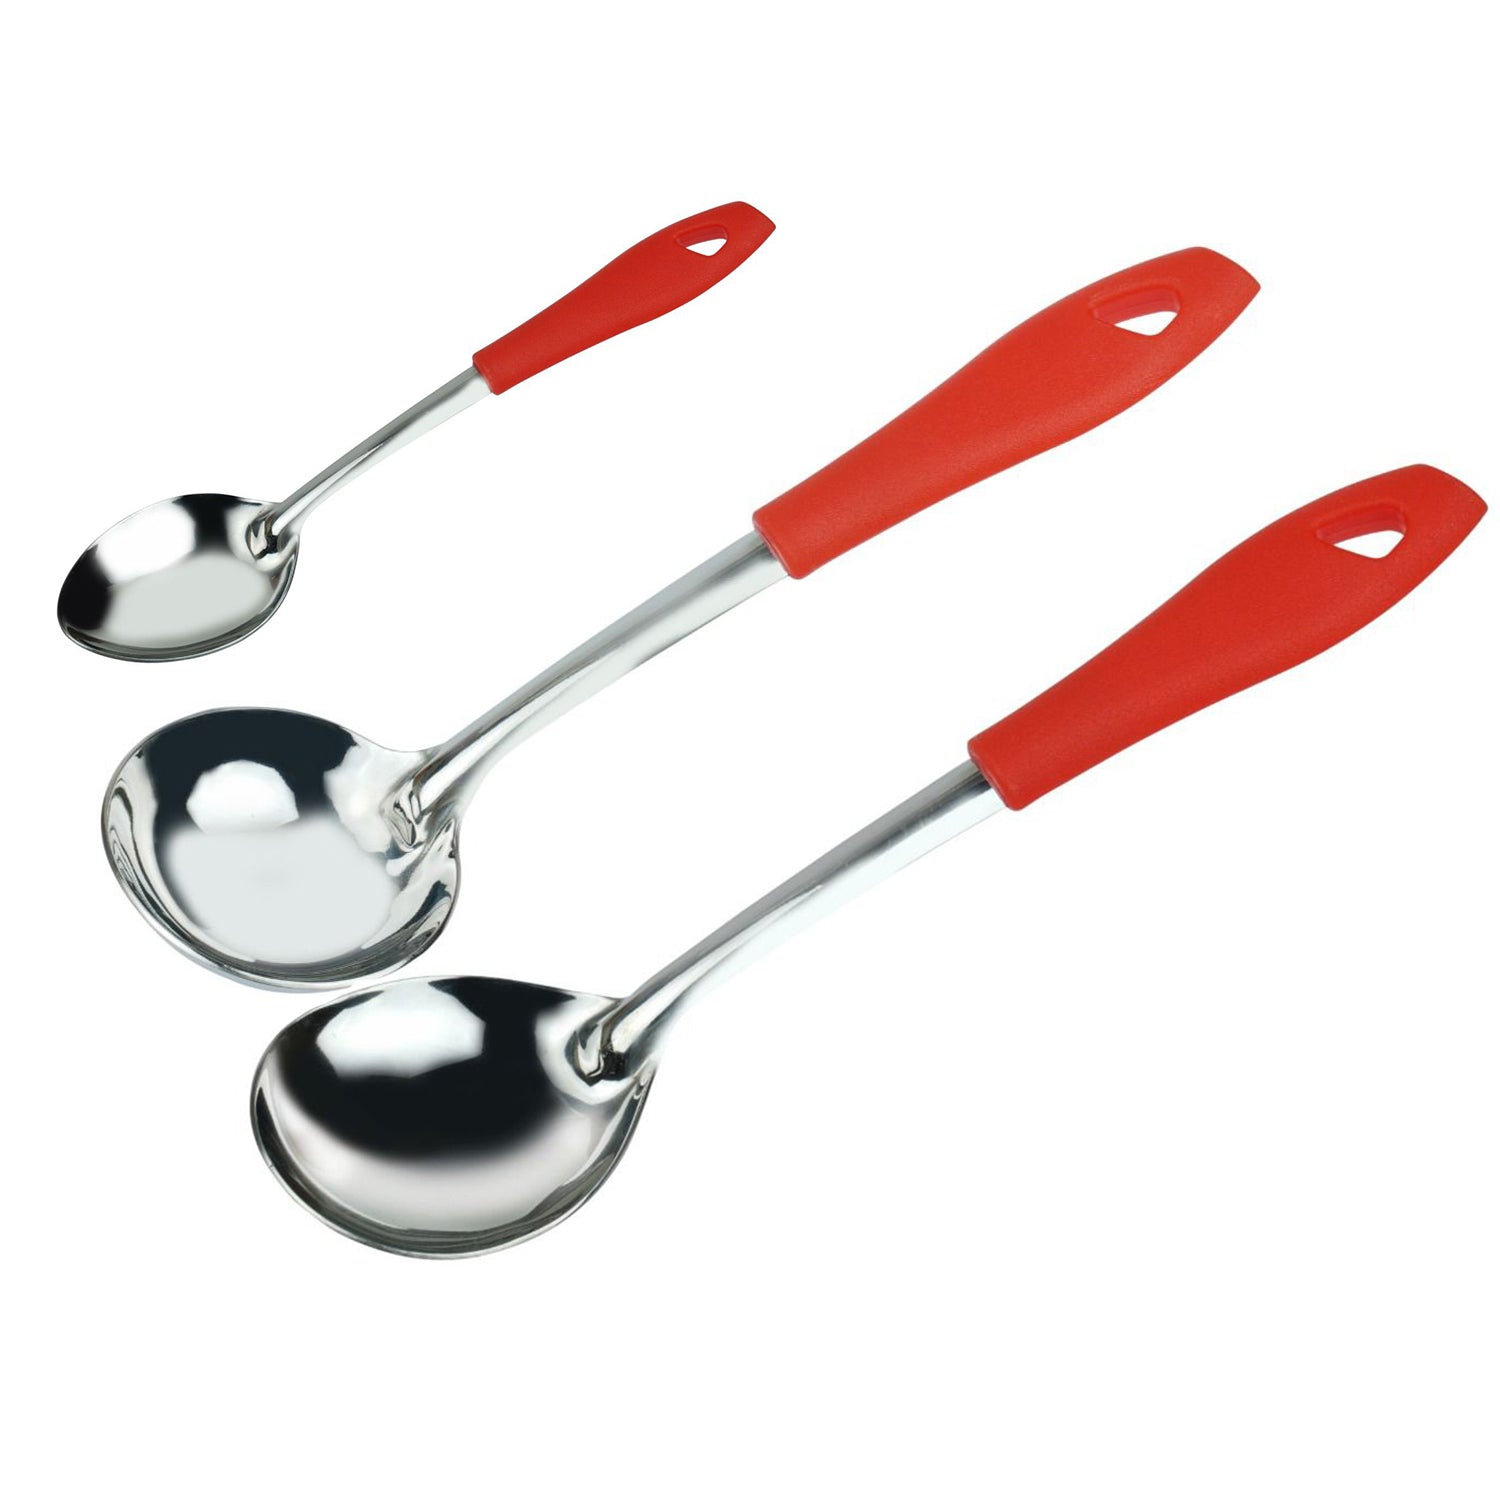 2701 6 Pc SS Serving Spoon stand used in all kinds of household and kitchen places for holding spoons etc. Dukandaily